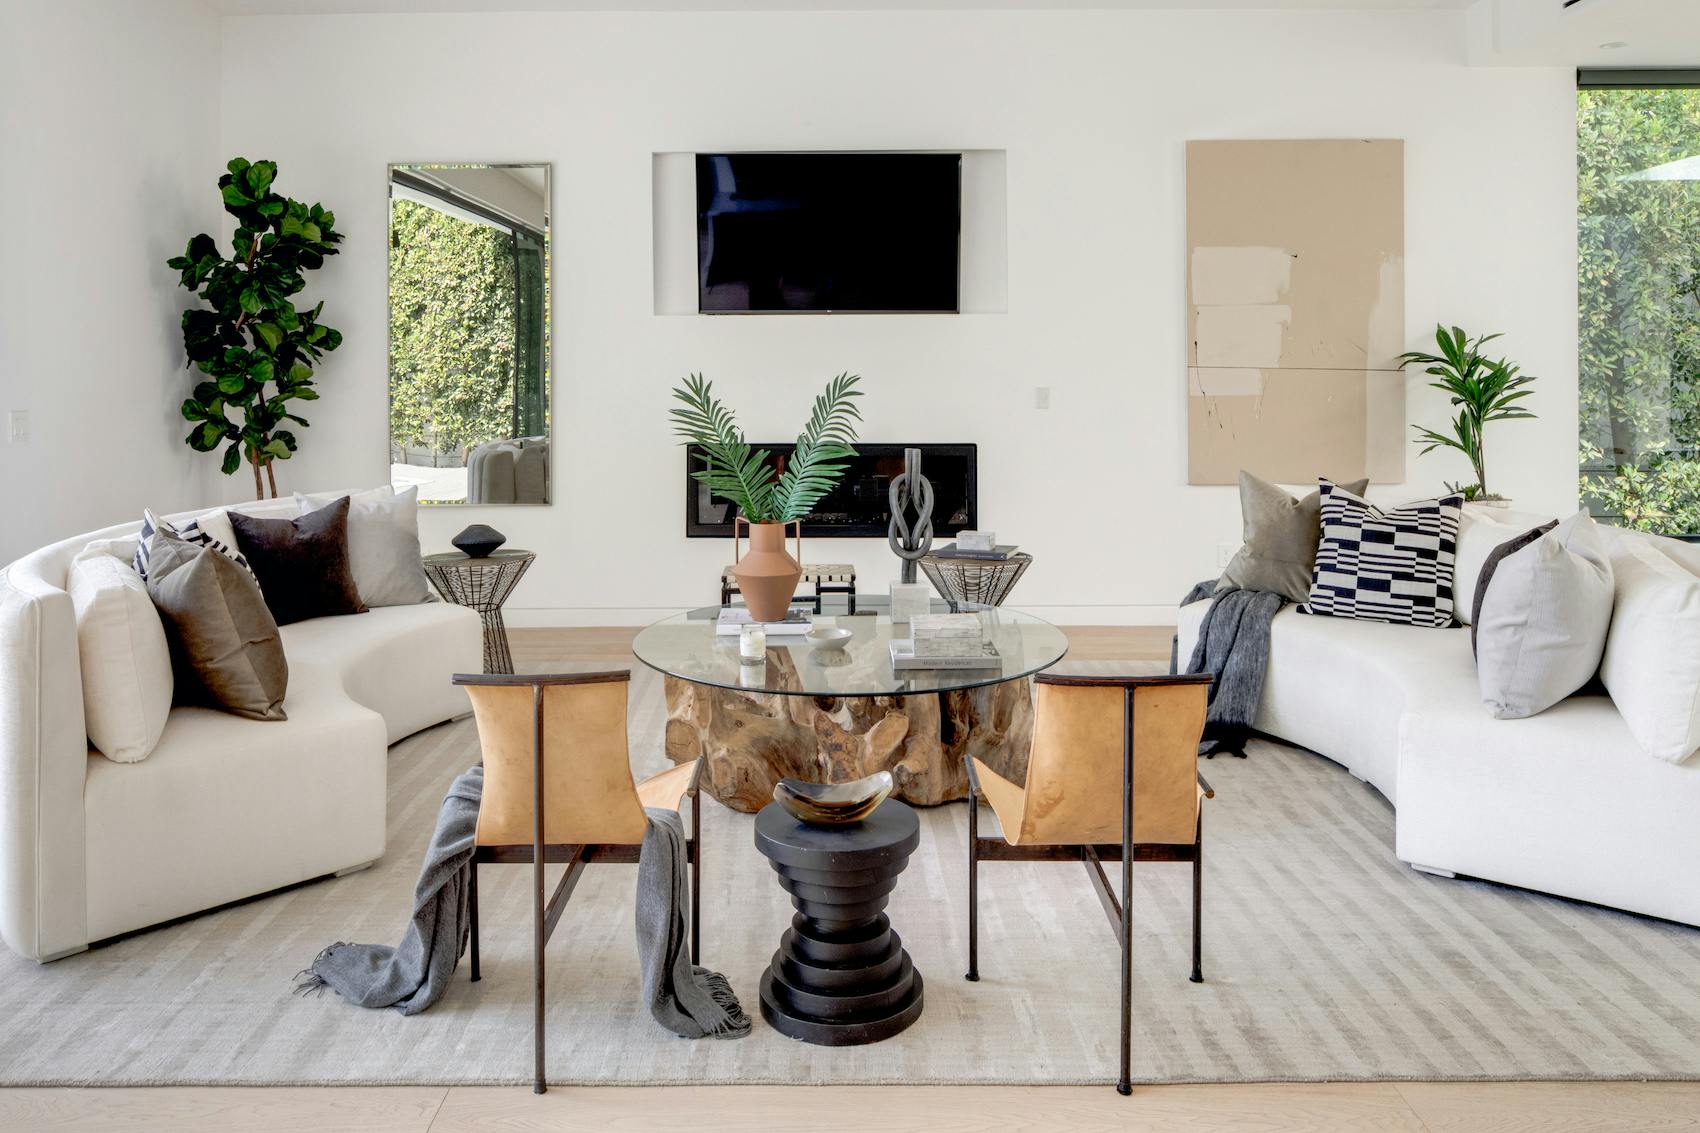 Meridith-Baer-Home-Home-Staging-Southern-California-West-Hollywood-Organic-Modern-Luxury-Homes-Modern-and-Contemporary-Living-Room